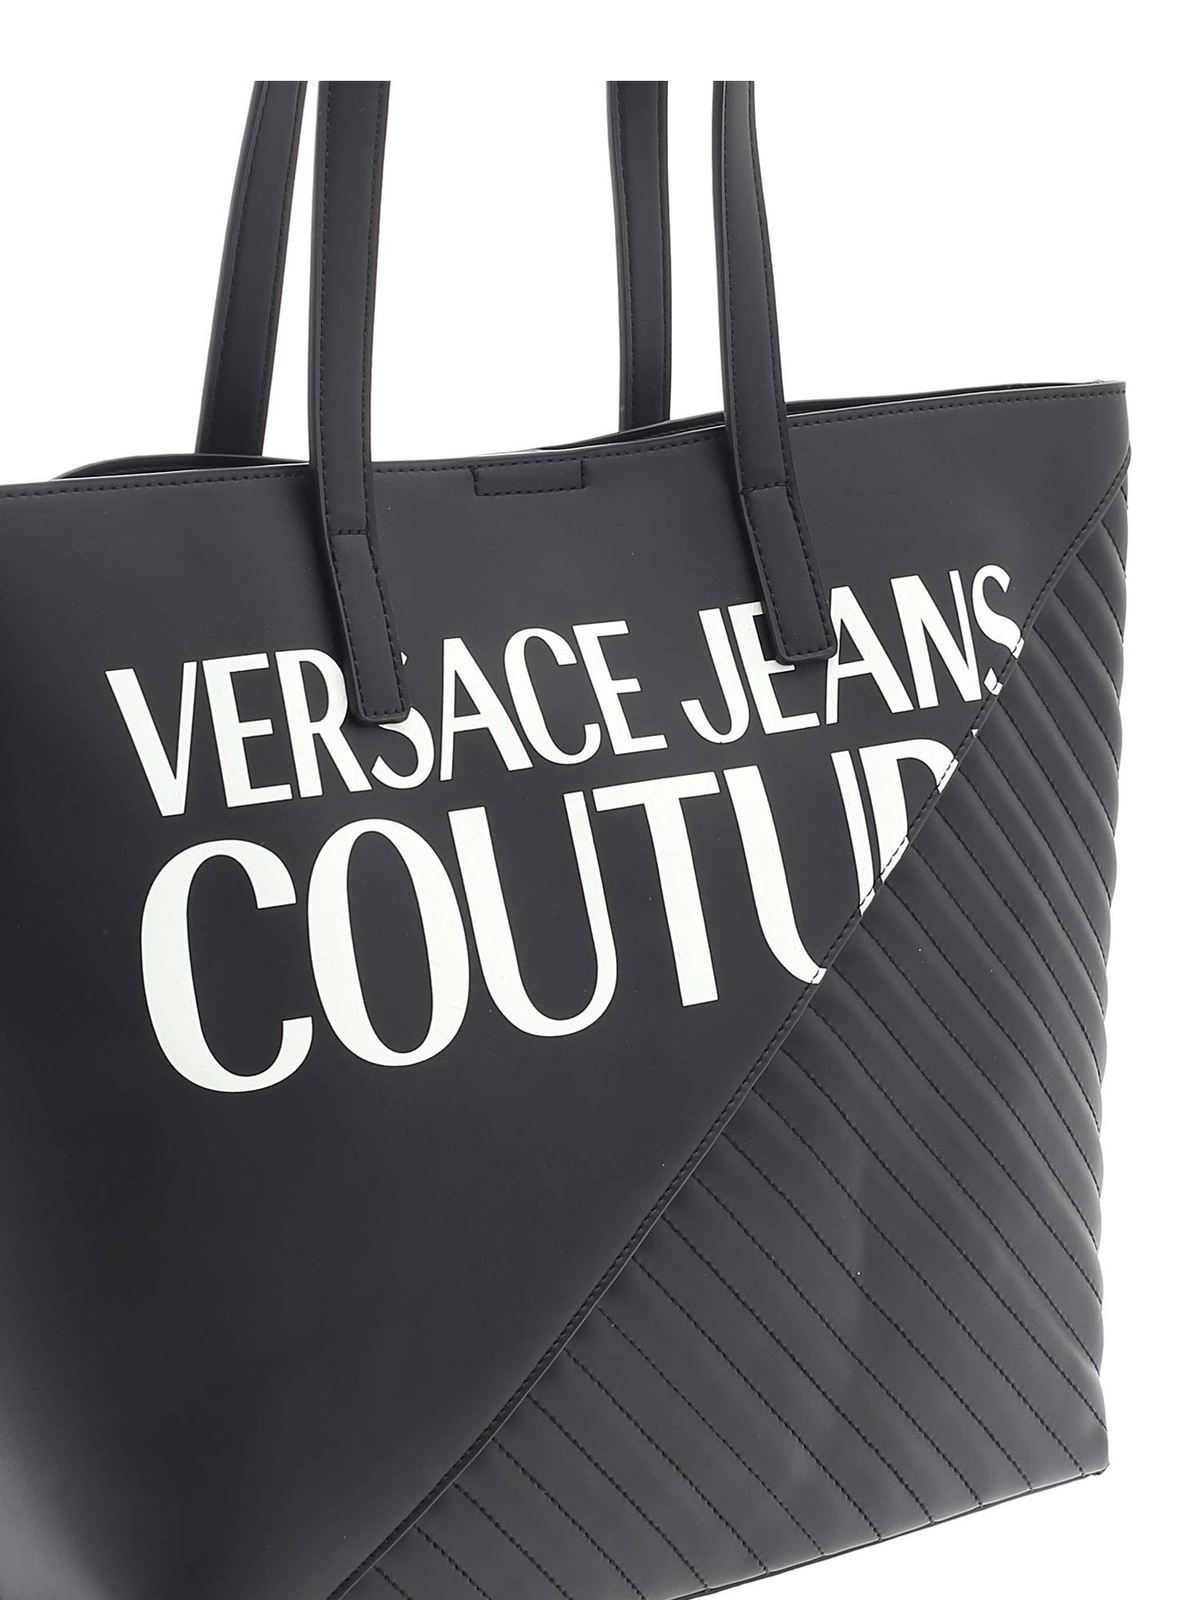 VERSACE JEANS COUTURE トートバッグ ブラック